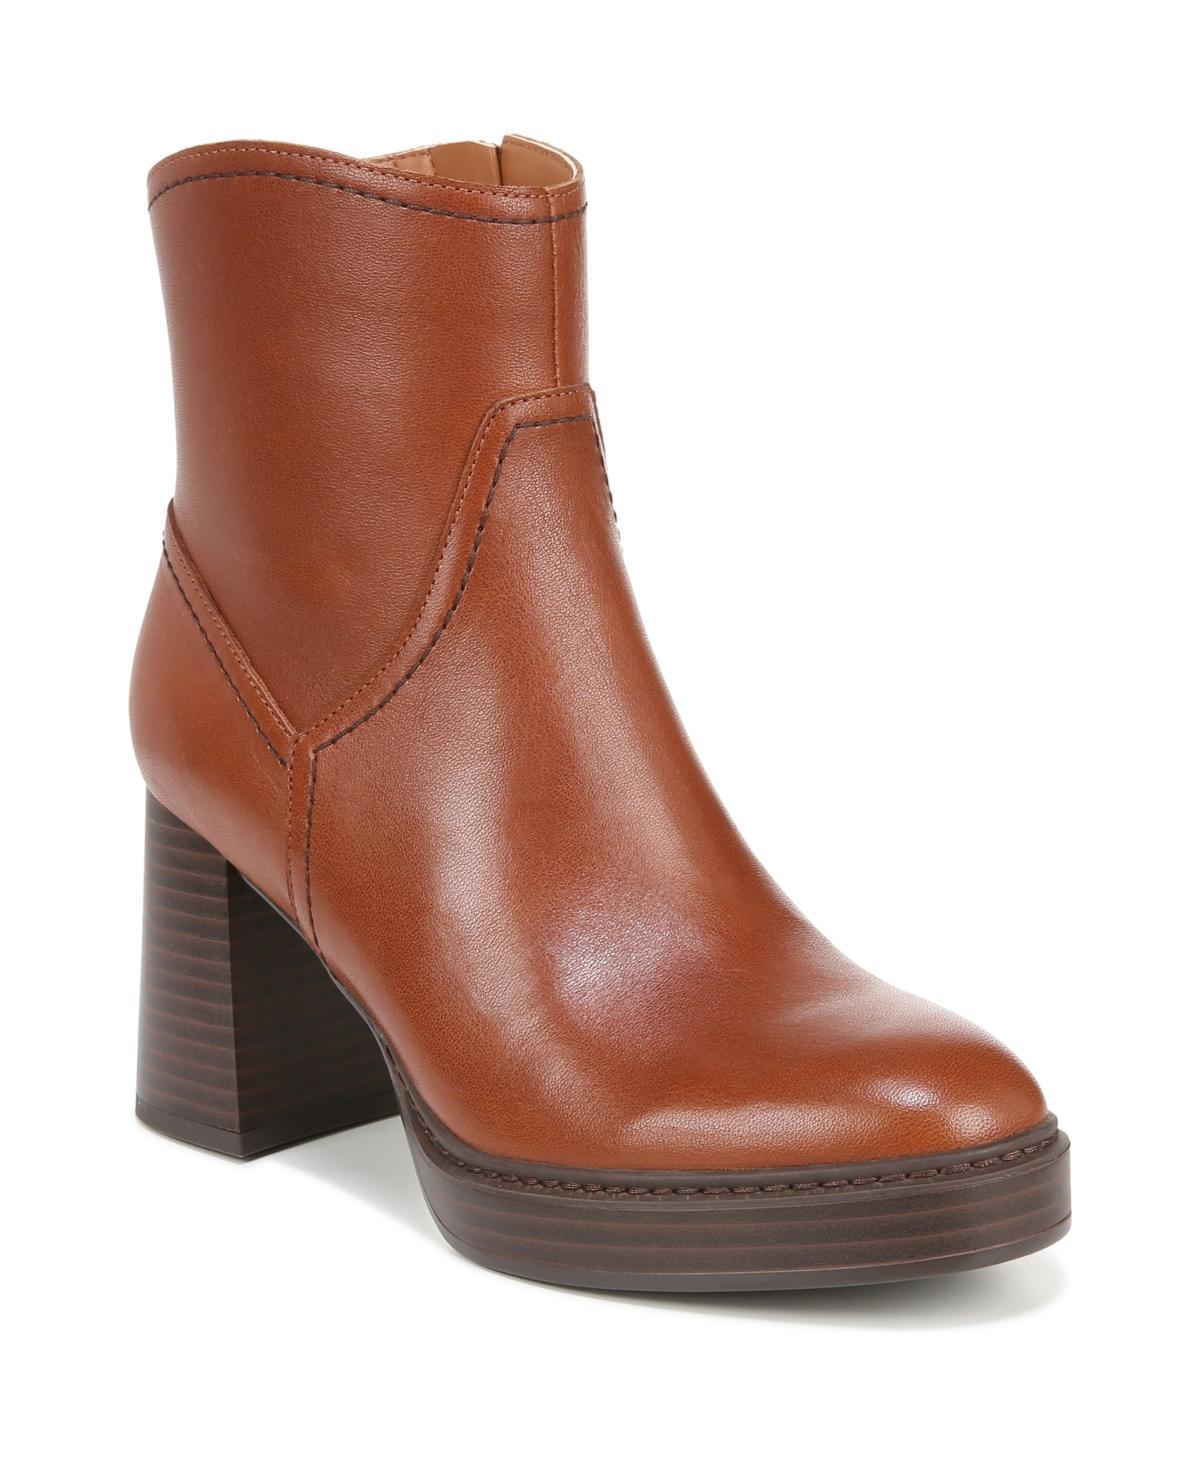 Naturalizer Orlean Bootie Product Image